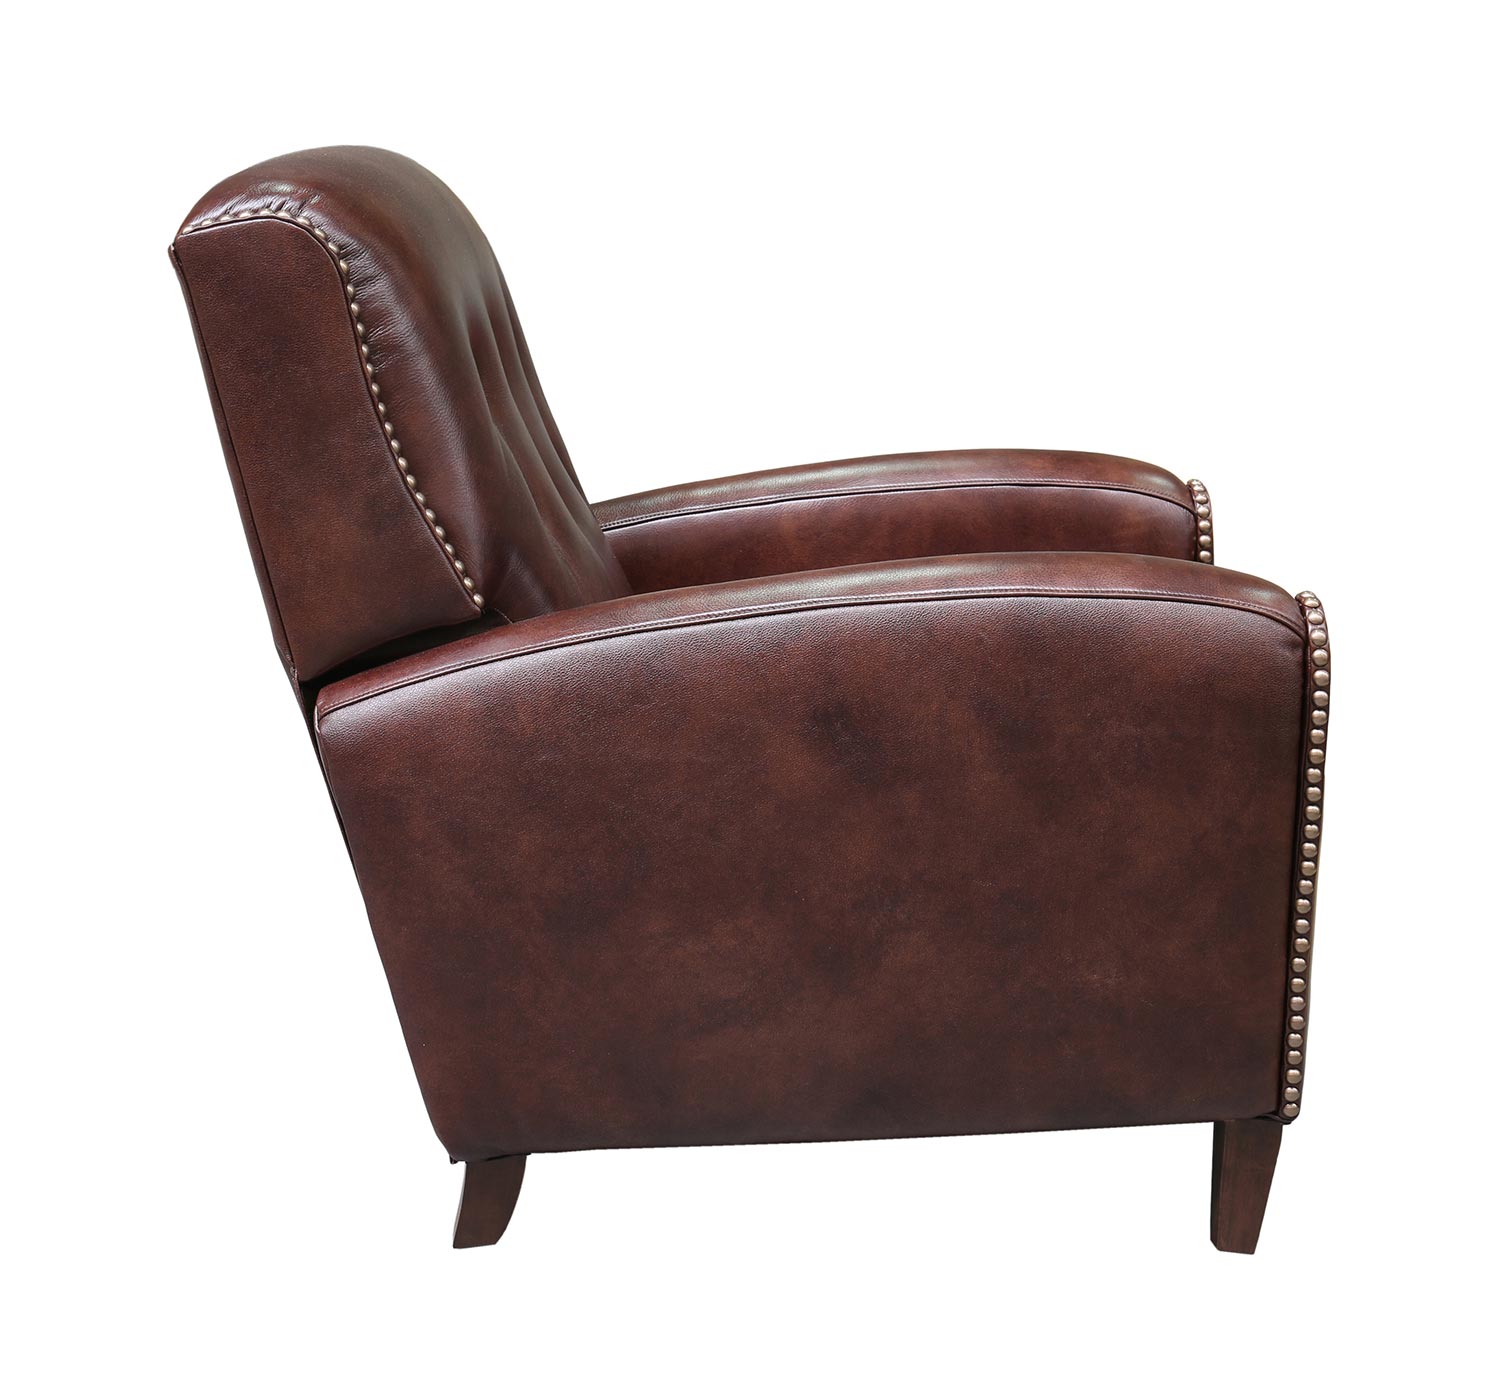 Barcalounger Willoughby Recliner Chair - Wenlock Fudge/All Leather